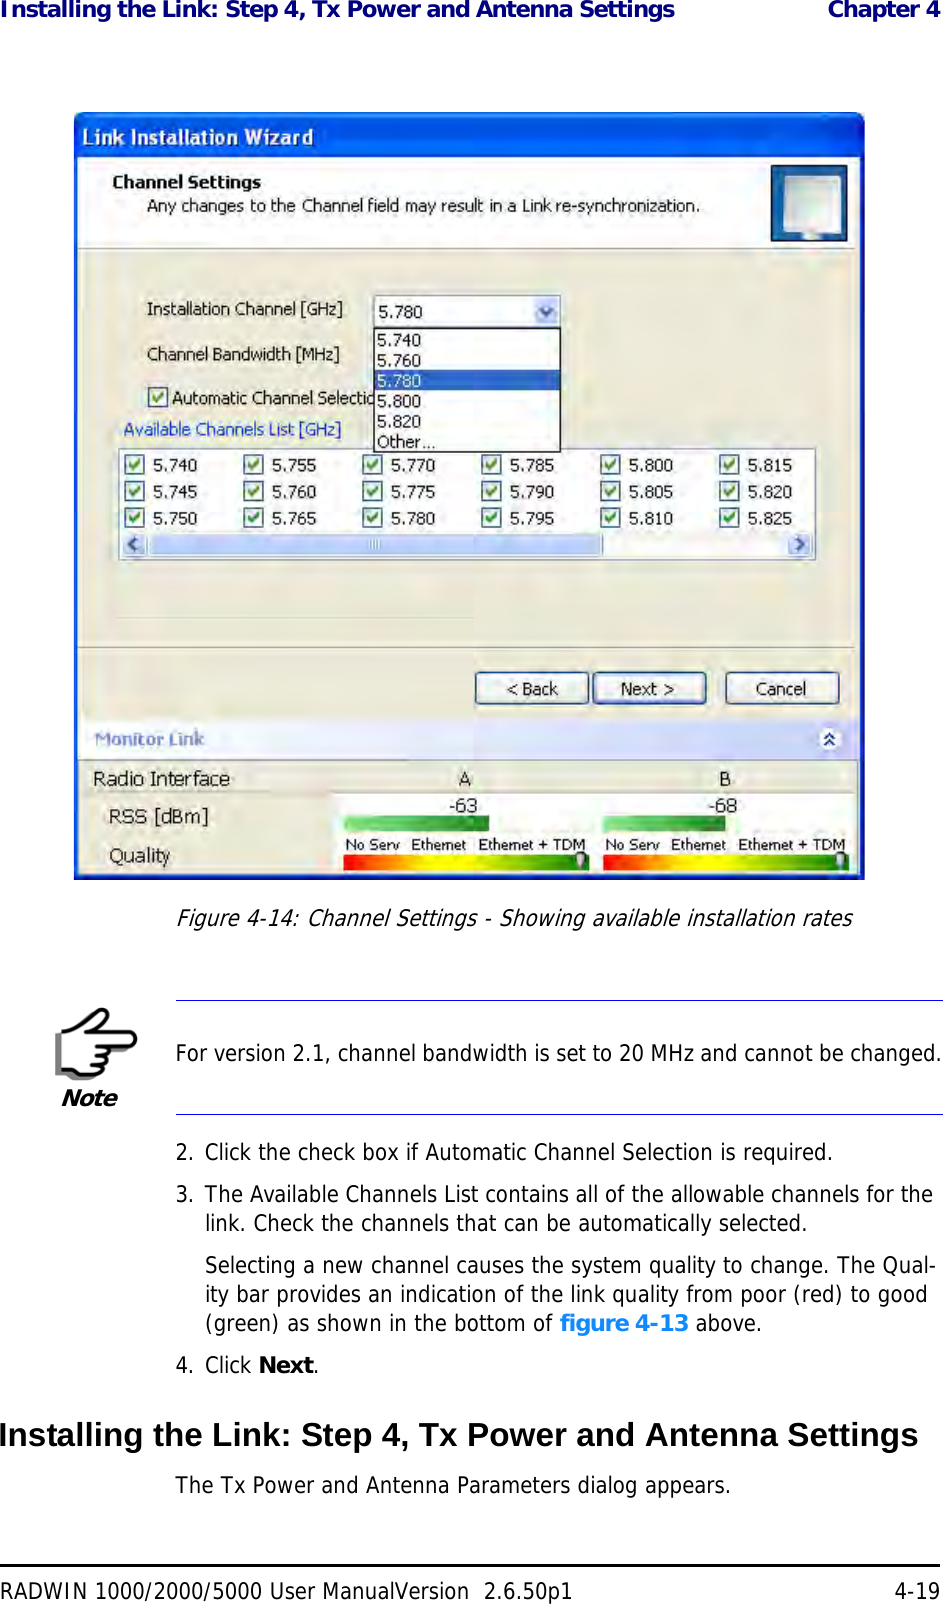 Installing the Link: Step 4, Tx Power and Antenna Settings  Chapter 4RADWIN 1000/2000/5000 User ManualVersion  2.6.50p1 4-19Figure 4-14: Channel Settings - Showing available installation rates2. Click the check box if Automatic Channel Selection is required.3. The Available Channels List contains all of the allowable channels for the link. Check the channels that can be automatically selected.Selecting a new channel causes the system quality to change. The Qual-ity bar provides an indication of the link quality from poor (red) to good (green) as shown in the bottom of figure 4-13 above.4. Click Next.Installing the Link: Step 4, Tx Power and Antenna SettingsThe Tx Power and Antenna Parameters dialog appears.NoteFor version 2.1, channel bandwidth is set to 20 MHz and cannot be changed.